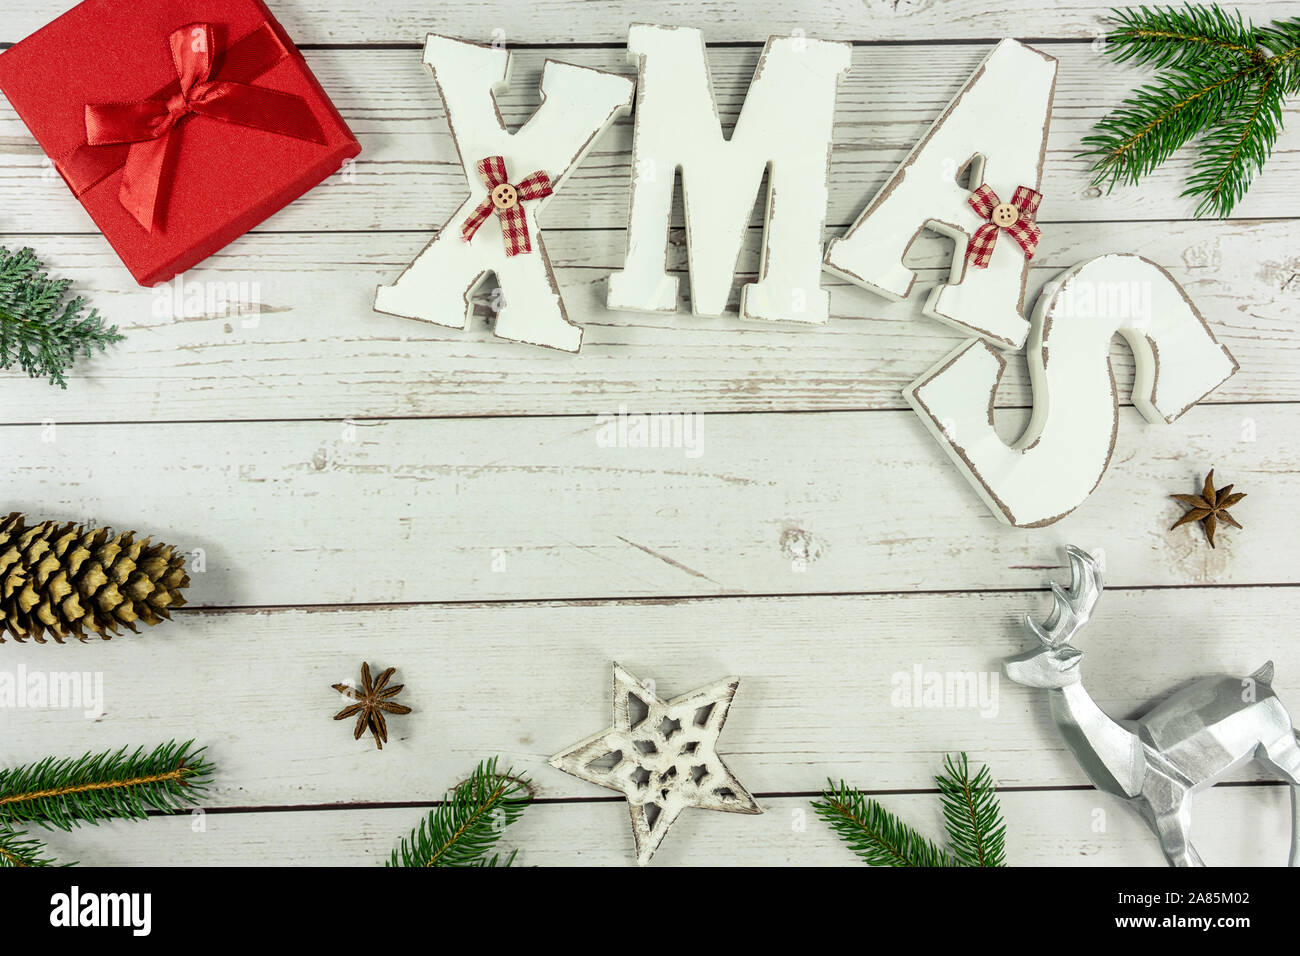 Christmas frame background flat lay on white wood with red gift box xmas text and other natural decoration Stock Photo